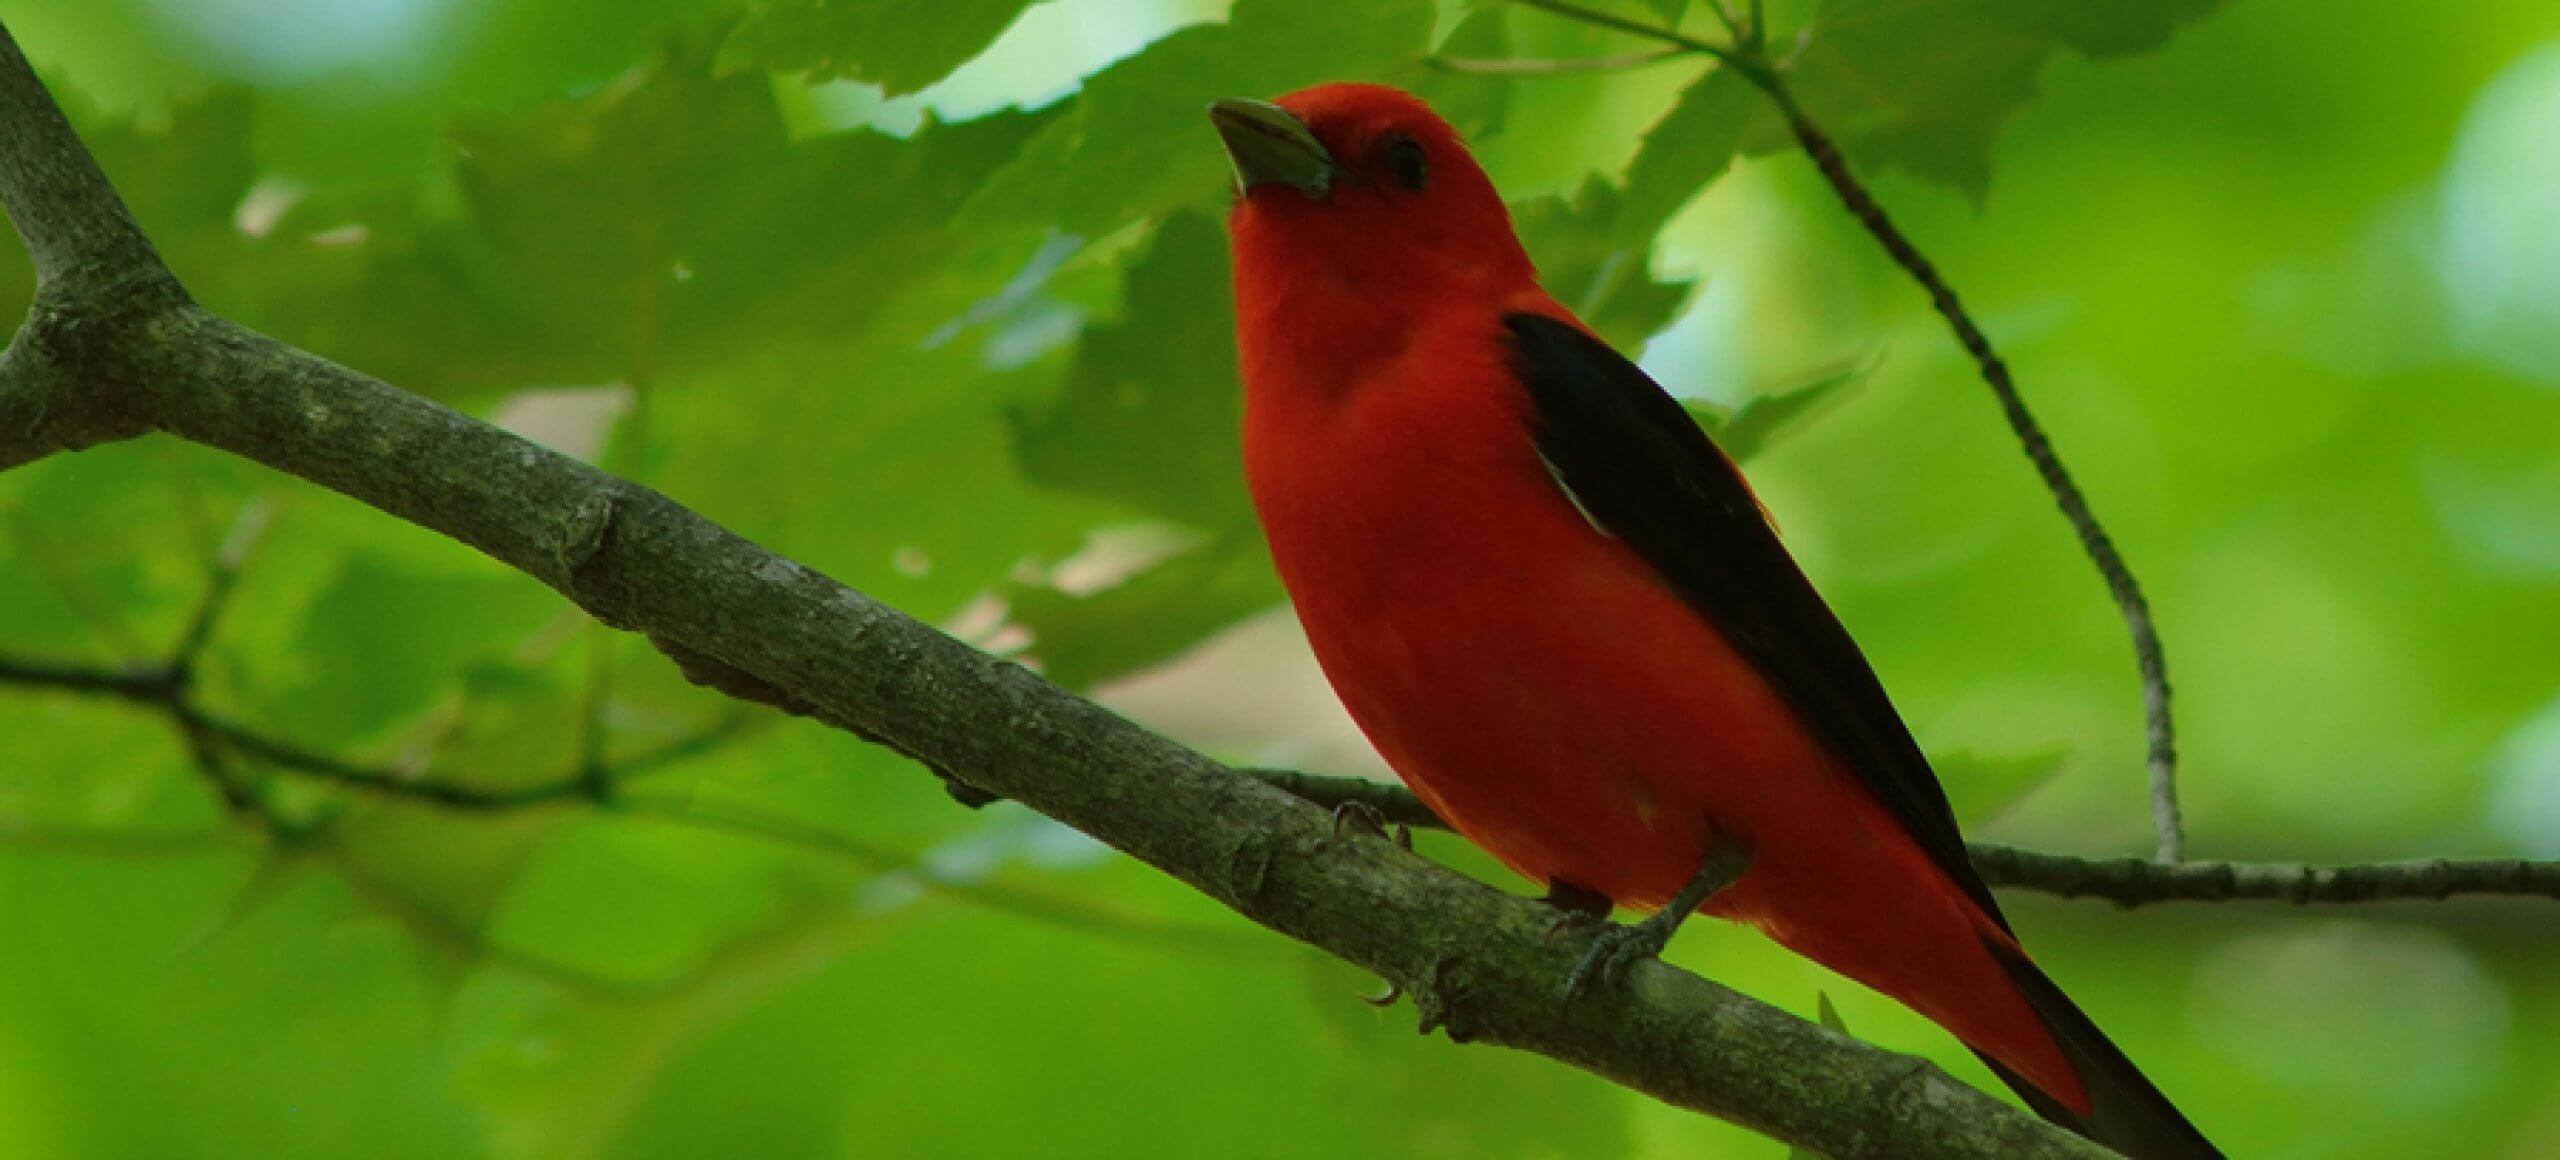 A Scarlet Tanager sits on a branch in the middle of a thick cover of green leaves.